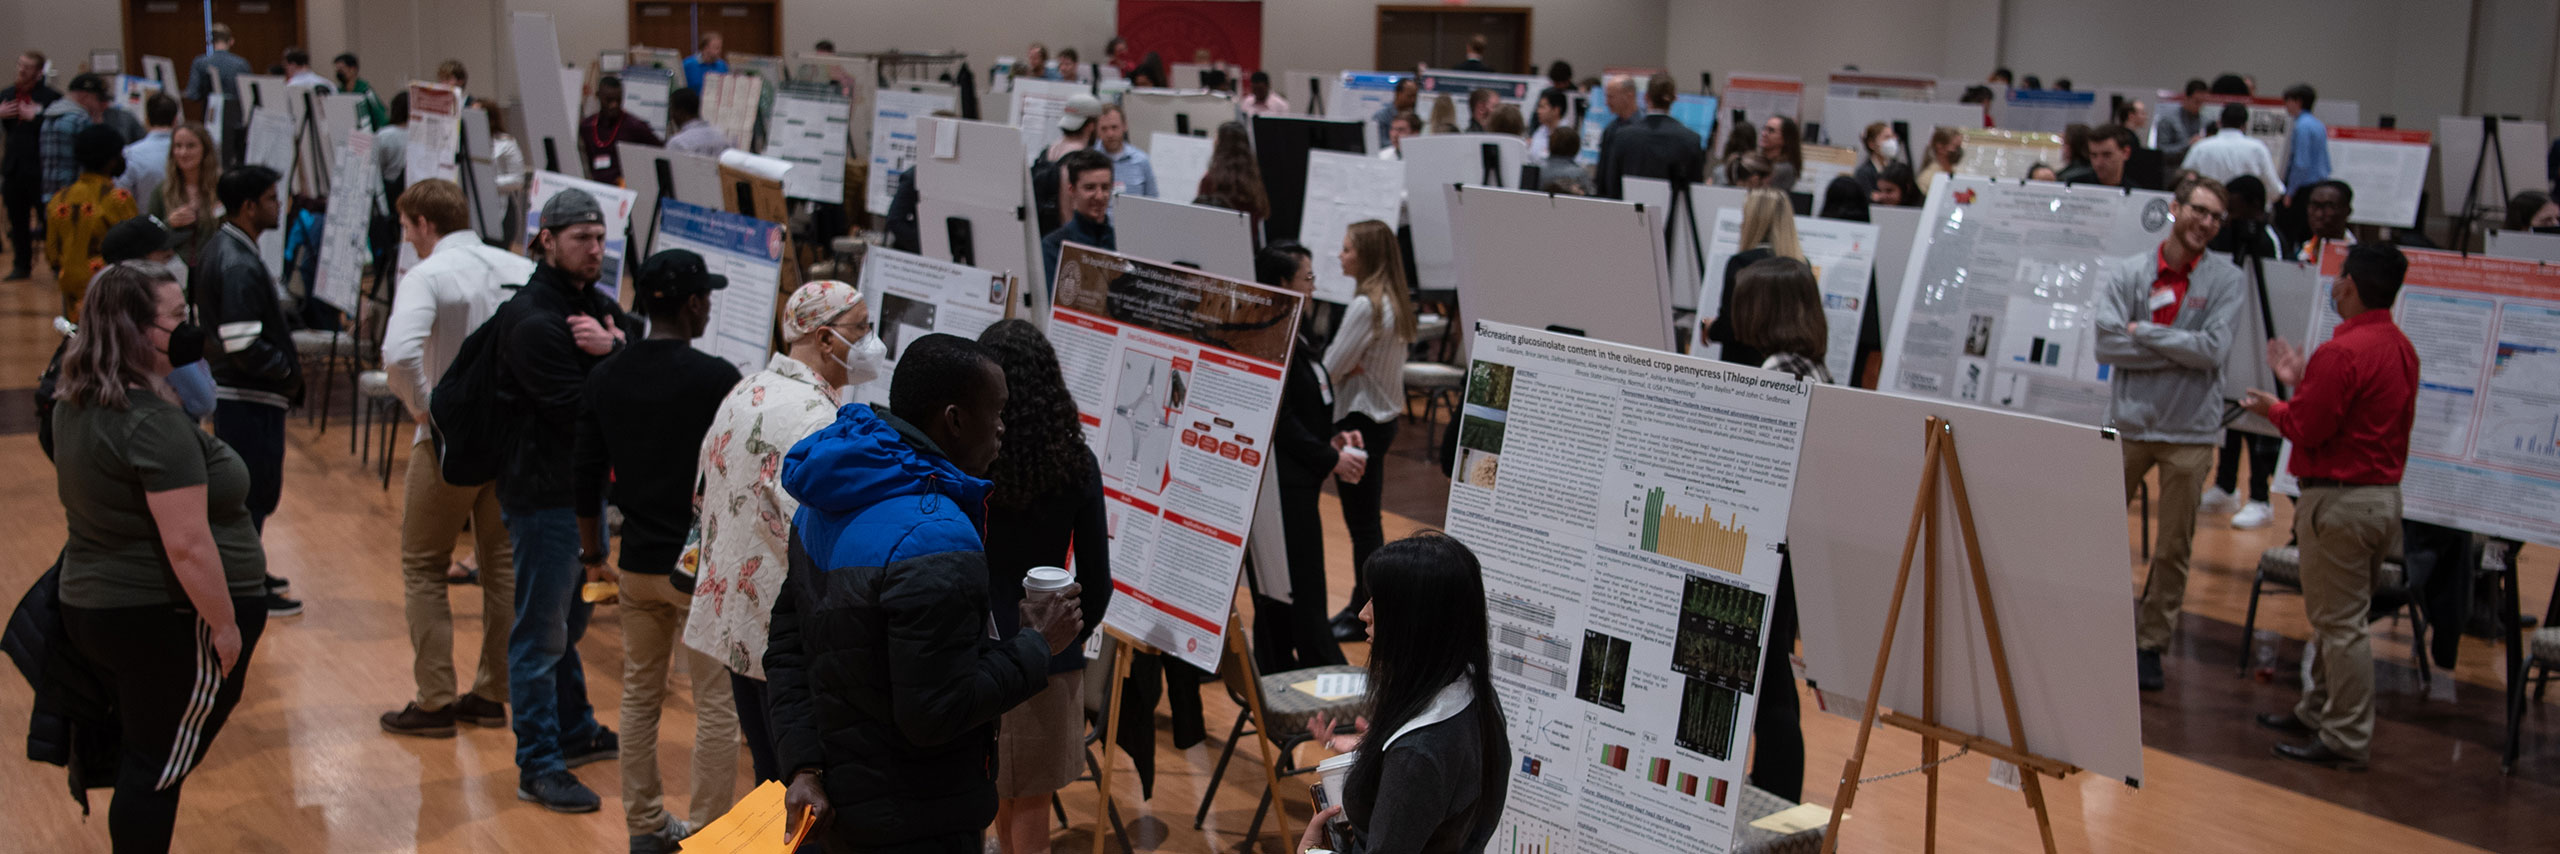 Students gather at the annual University Research Symposium in the Bone Student Center's Brown Ballroom